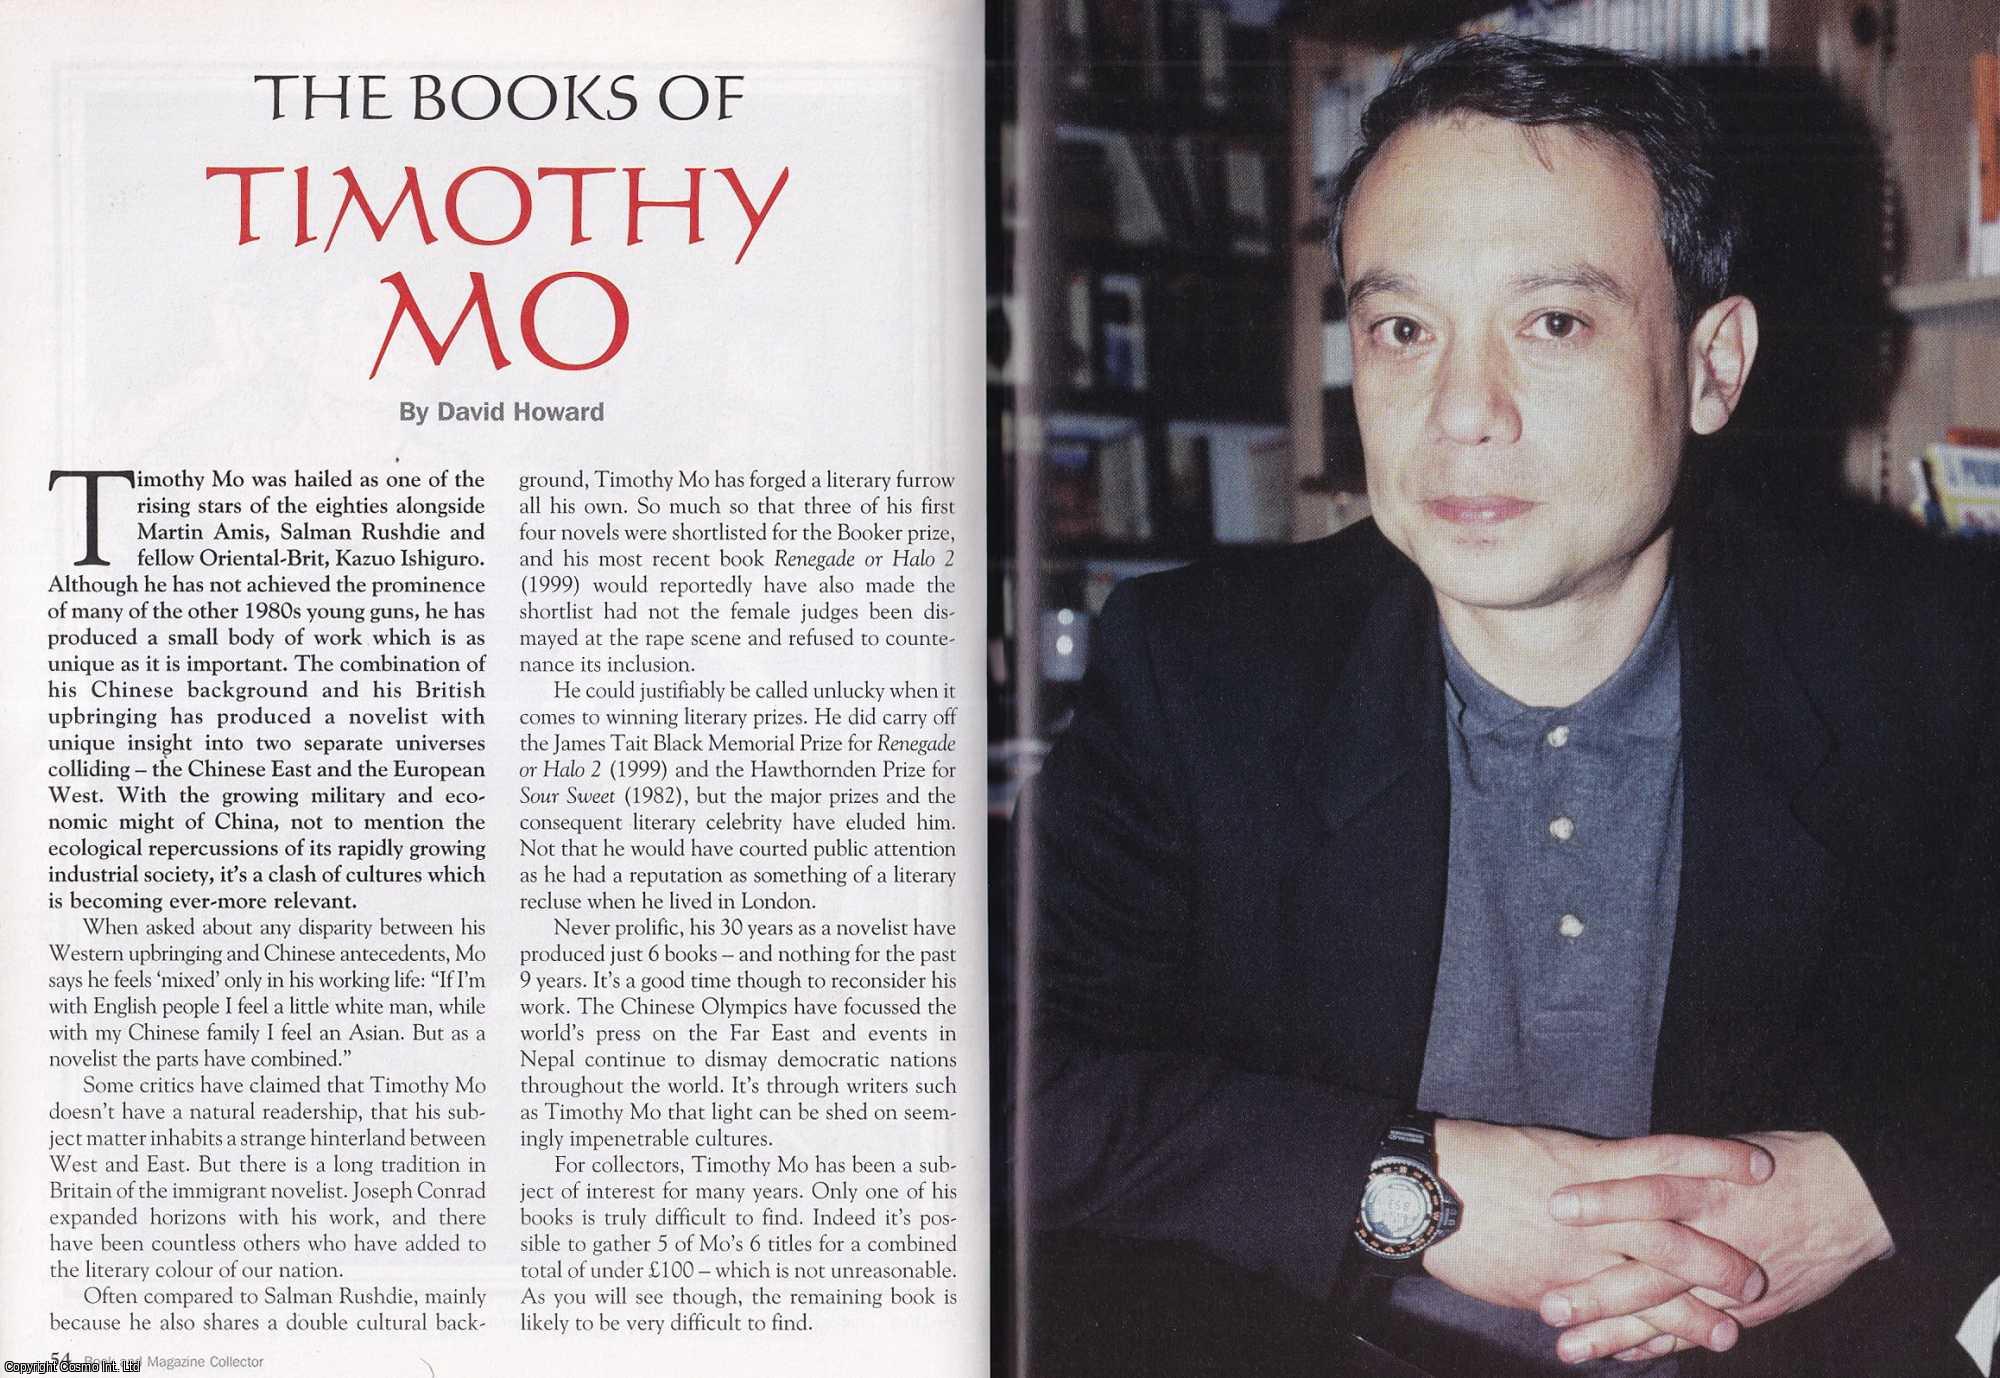 David Howard - The Books of Timothy Mo. This is an original article separated from an issue of The Book & Magazine Collector publication, 2008.